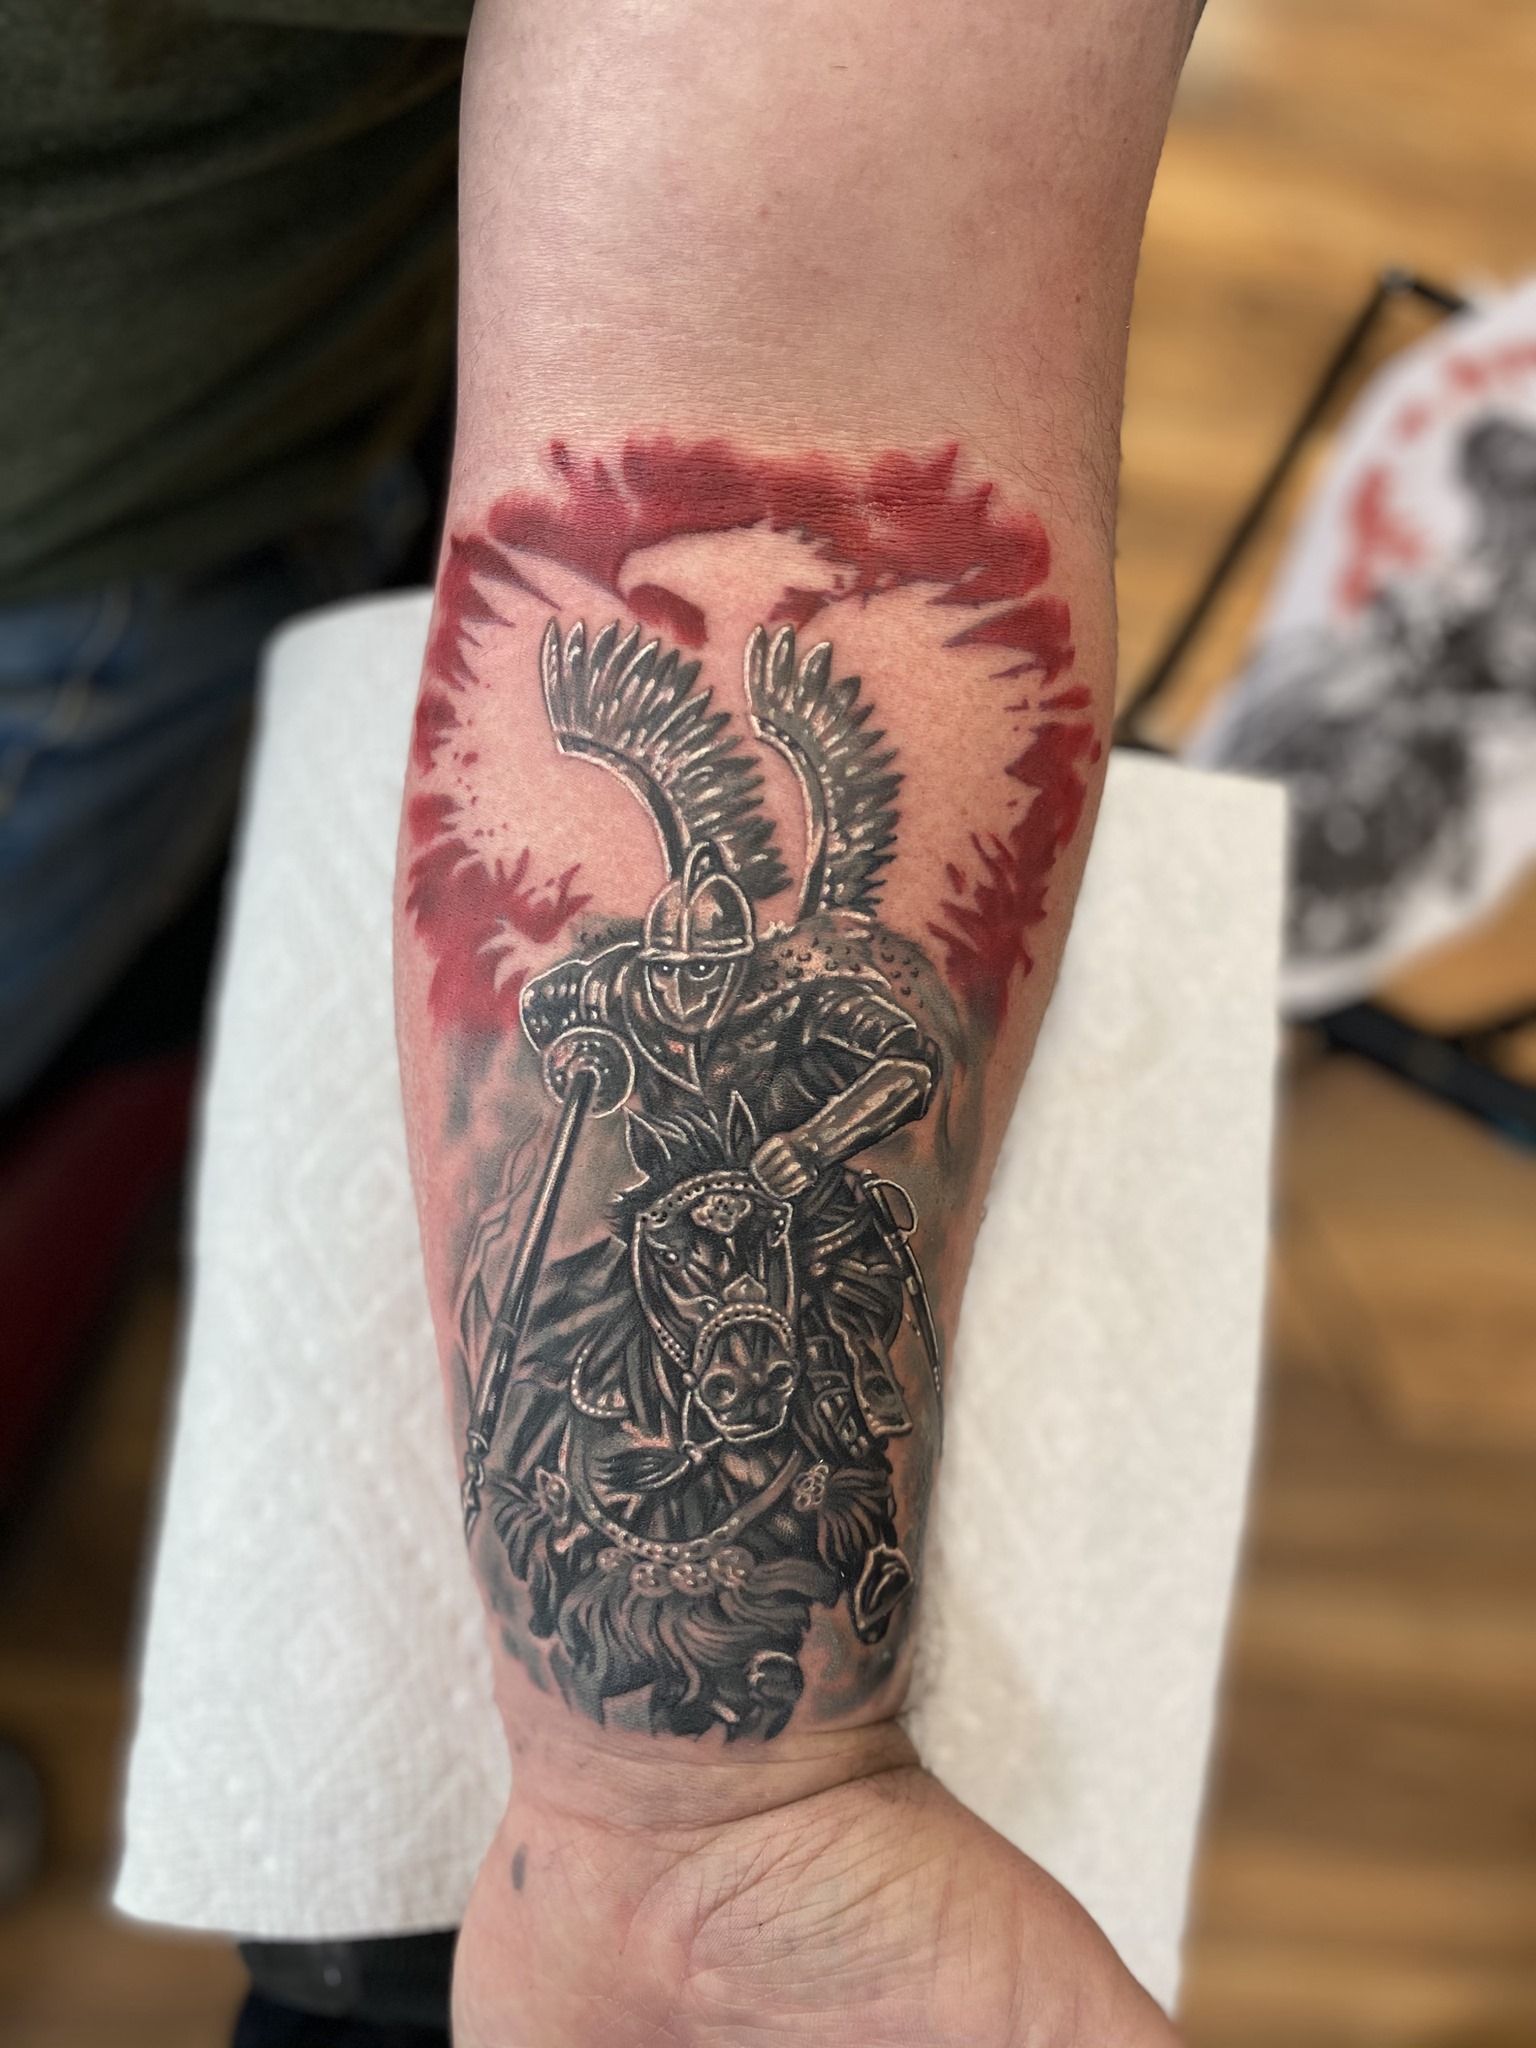 My baby bro might have gotten the most awesome patriotic tattoo ever polish  hussar helmet  9GAG